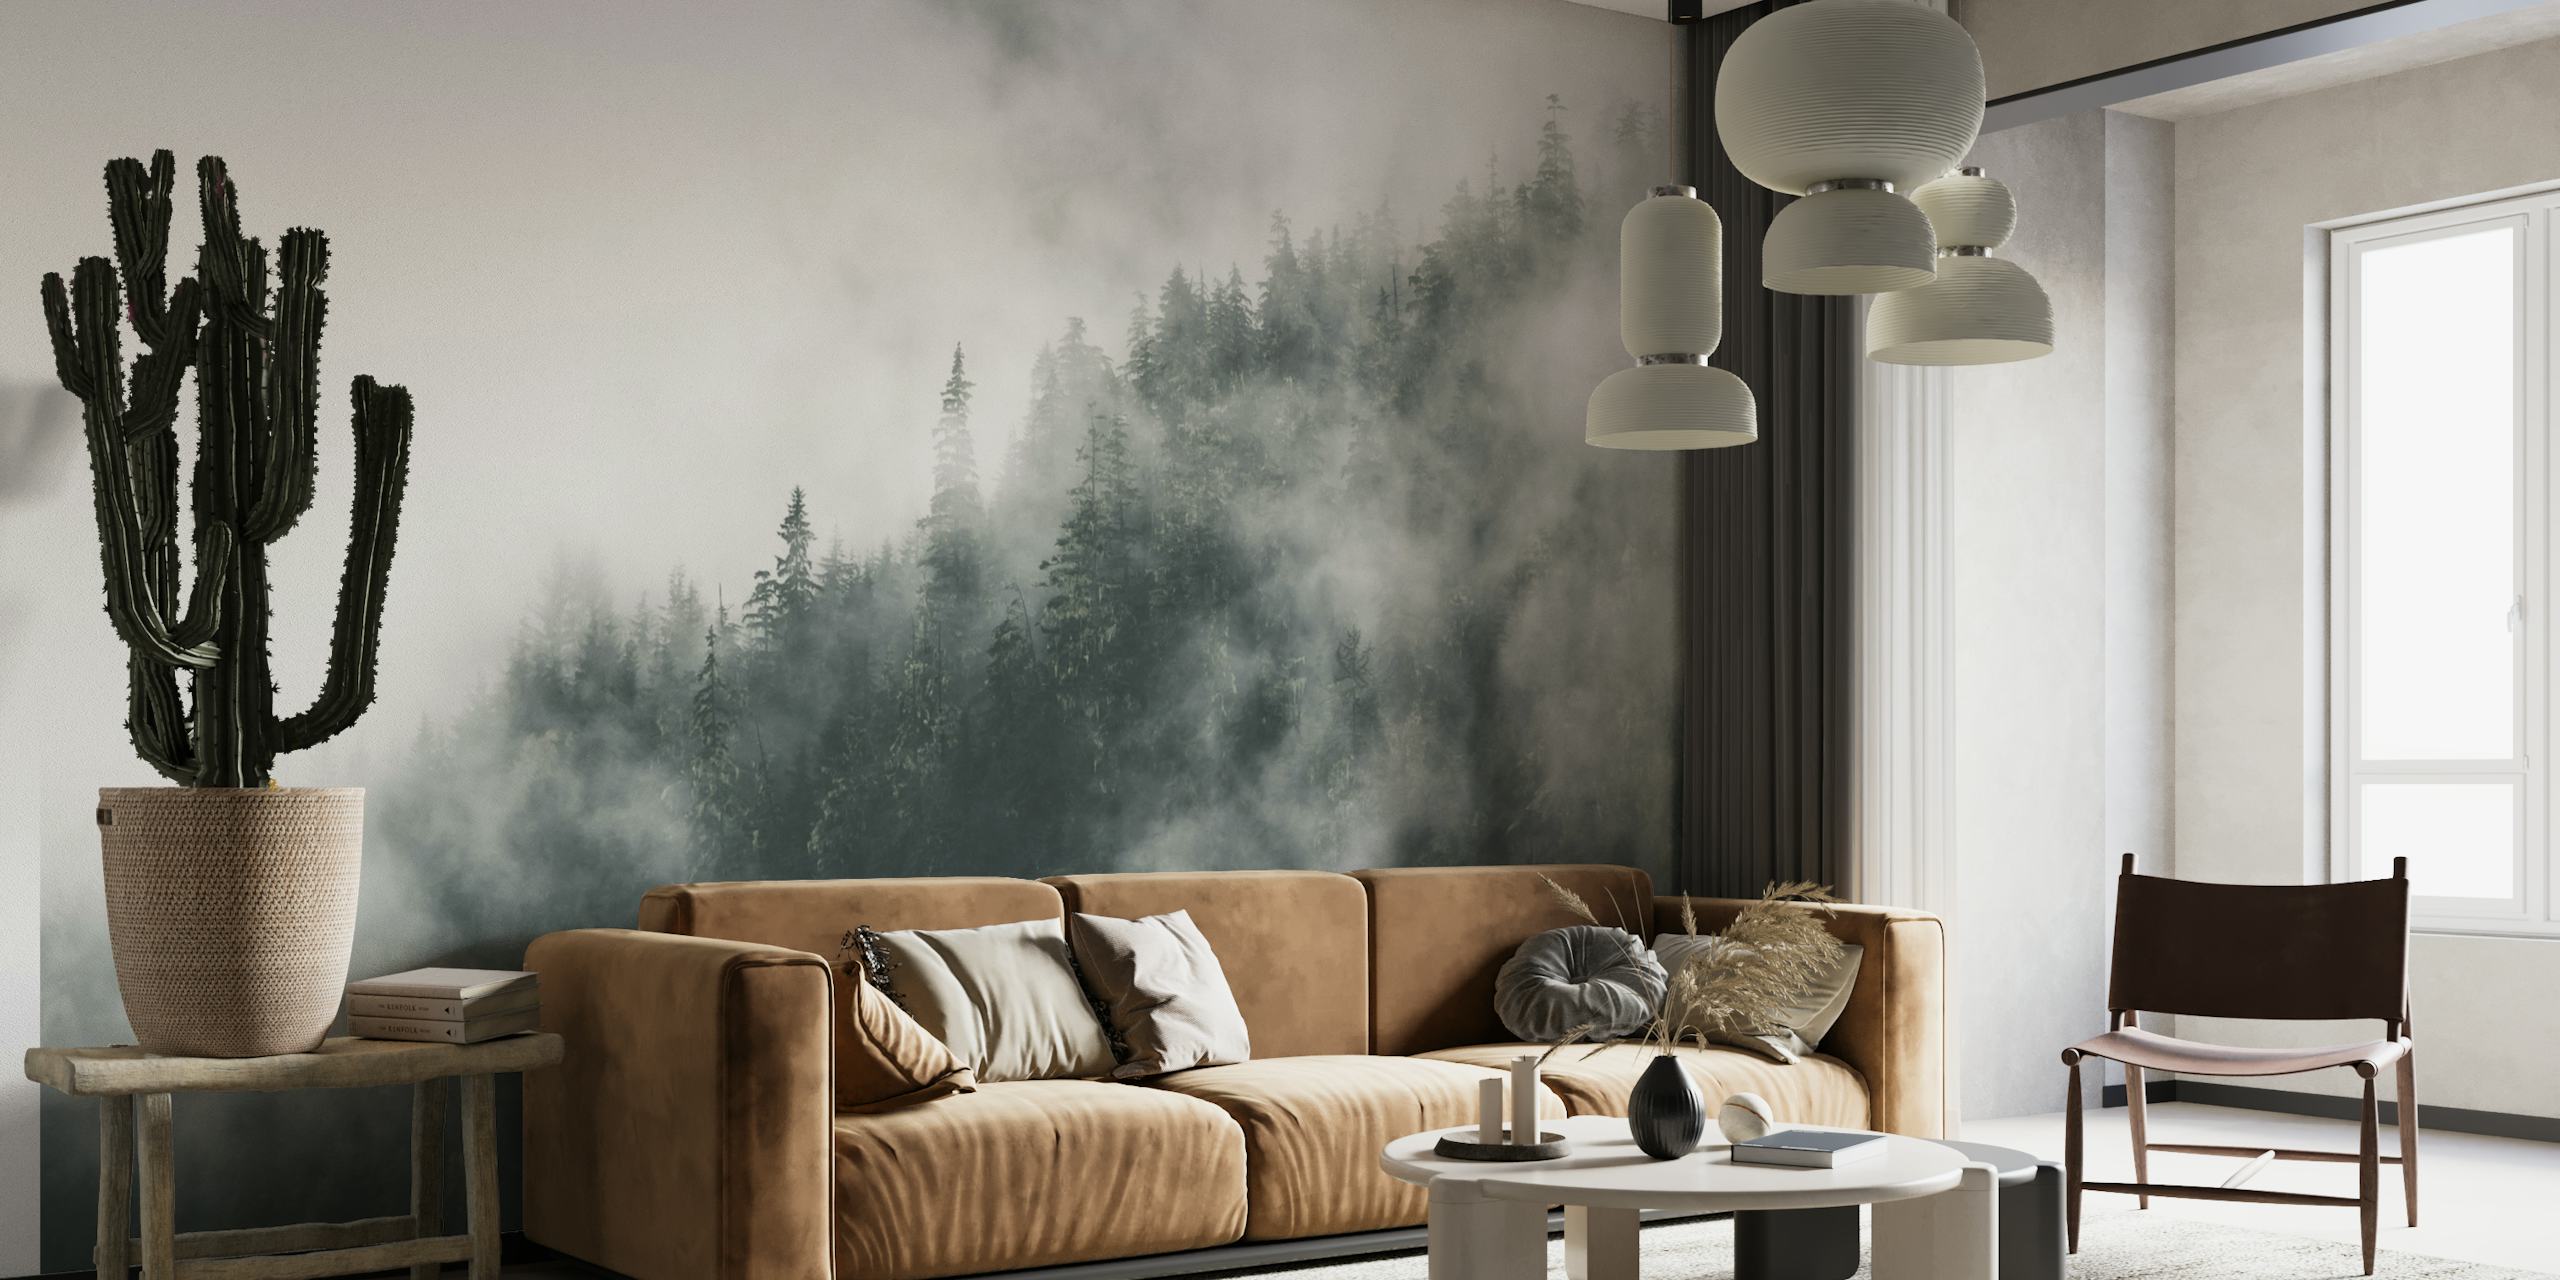 Misty forest wall mural with lush greenery